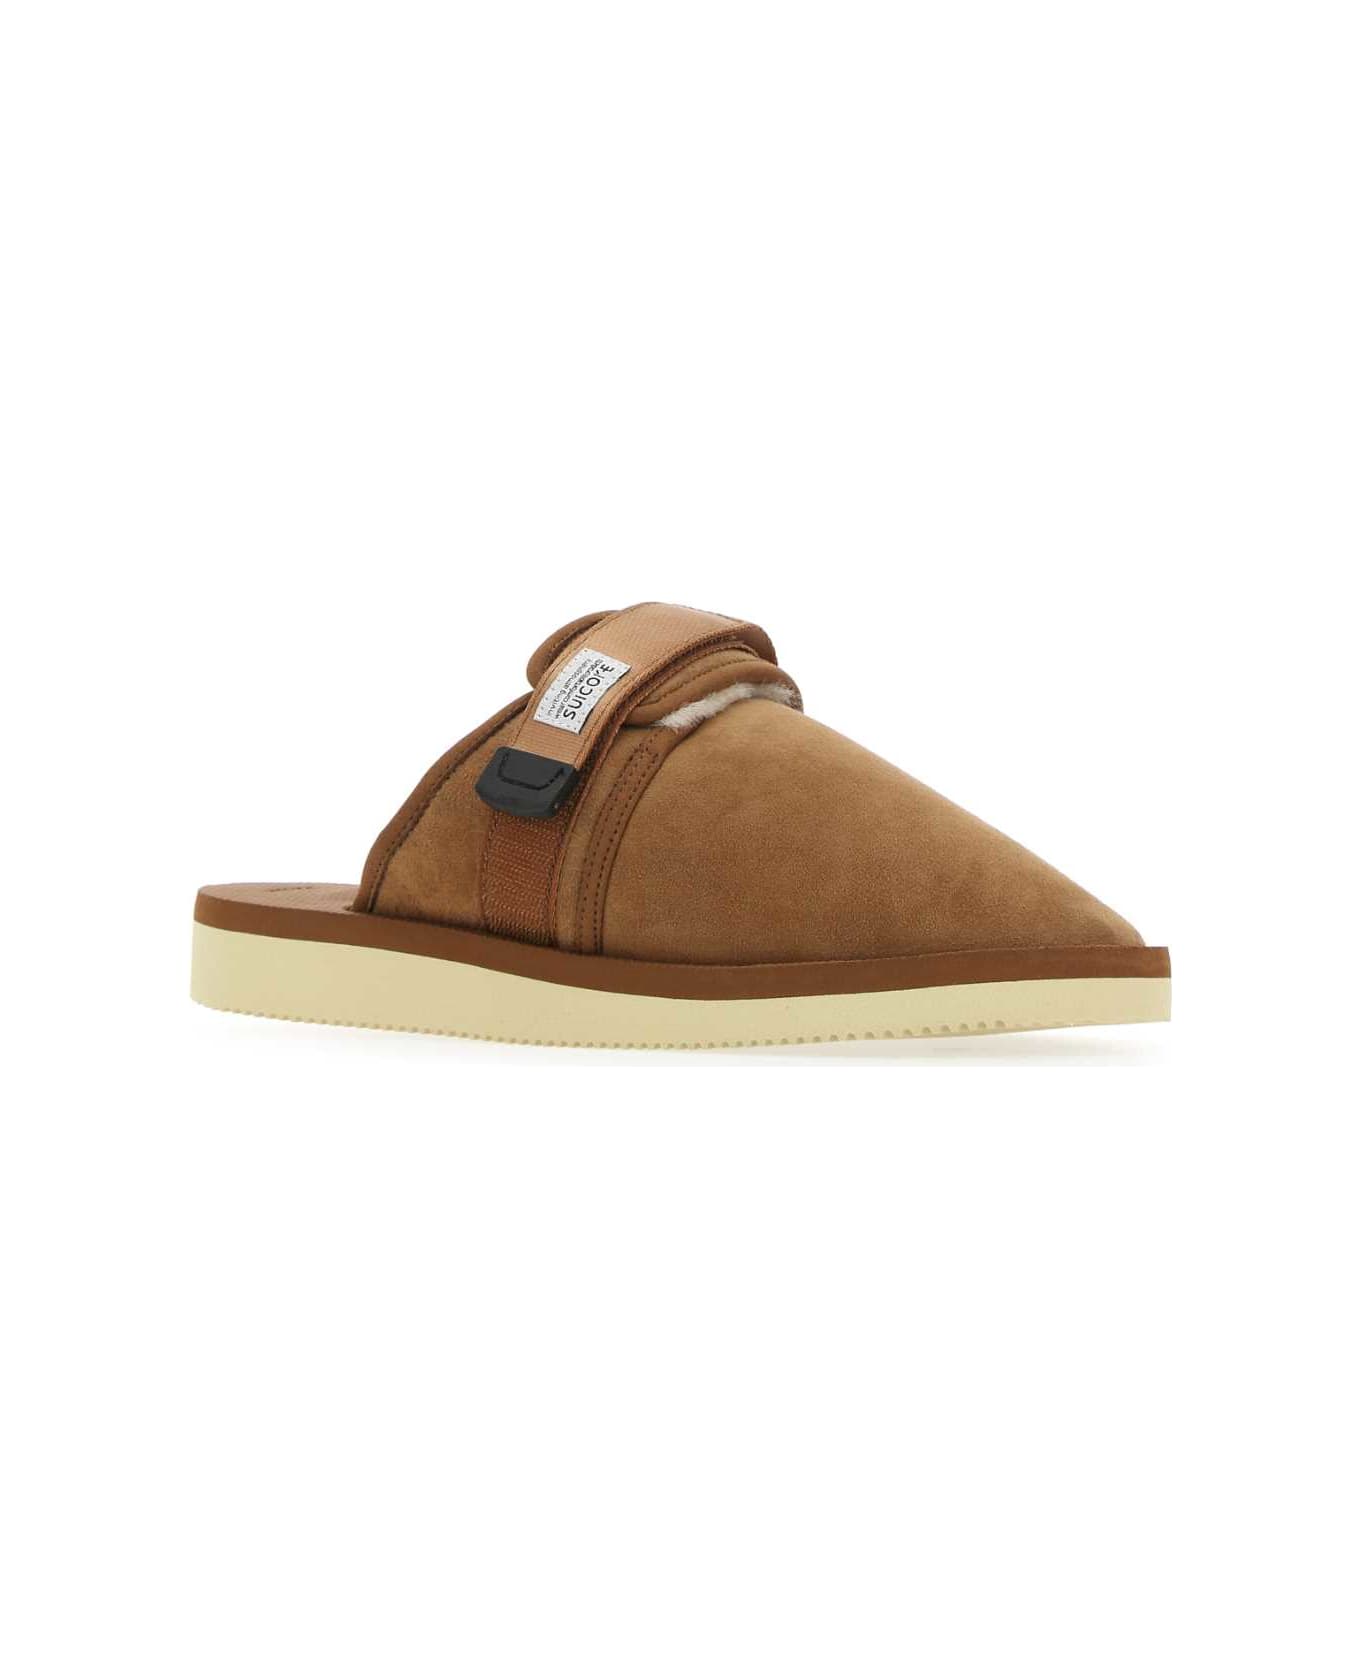 SUICOKE Biscuit Suede Zavo Slippers - BROWN